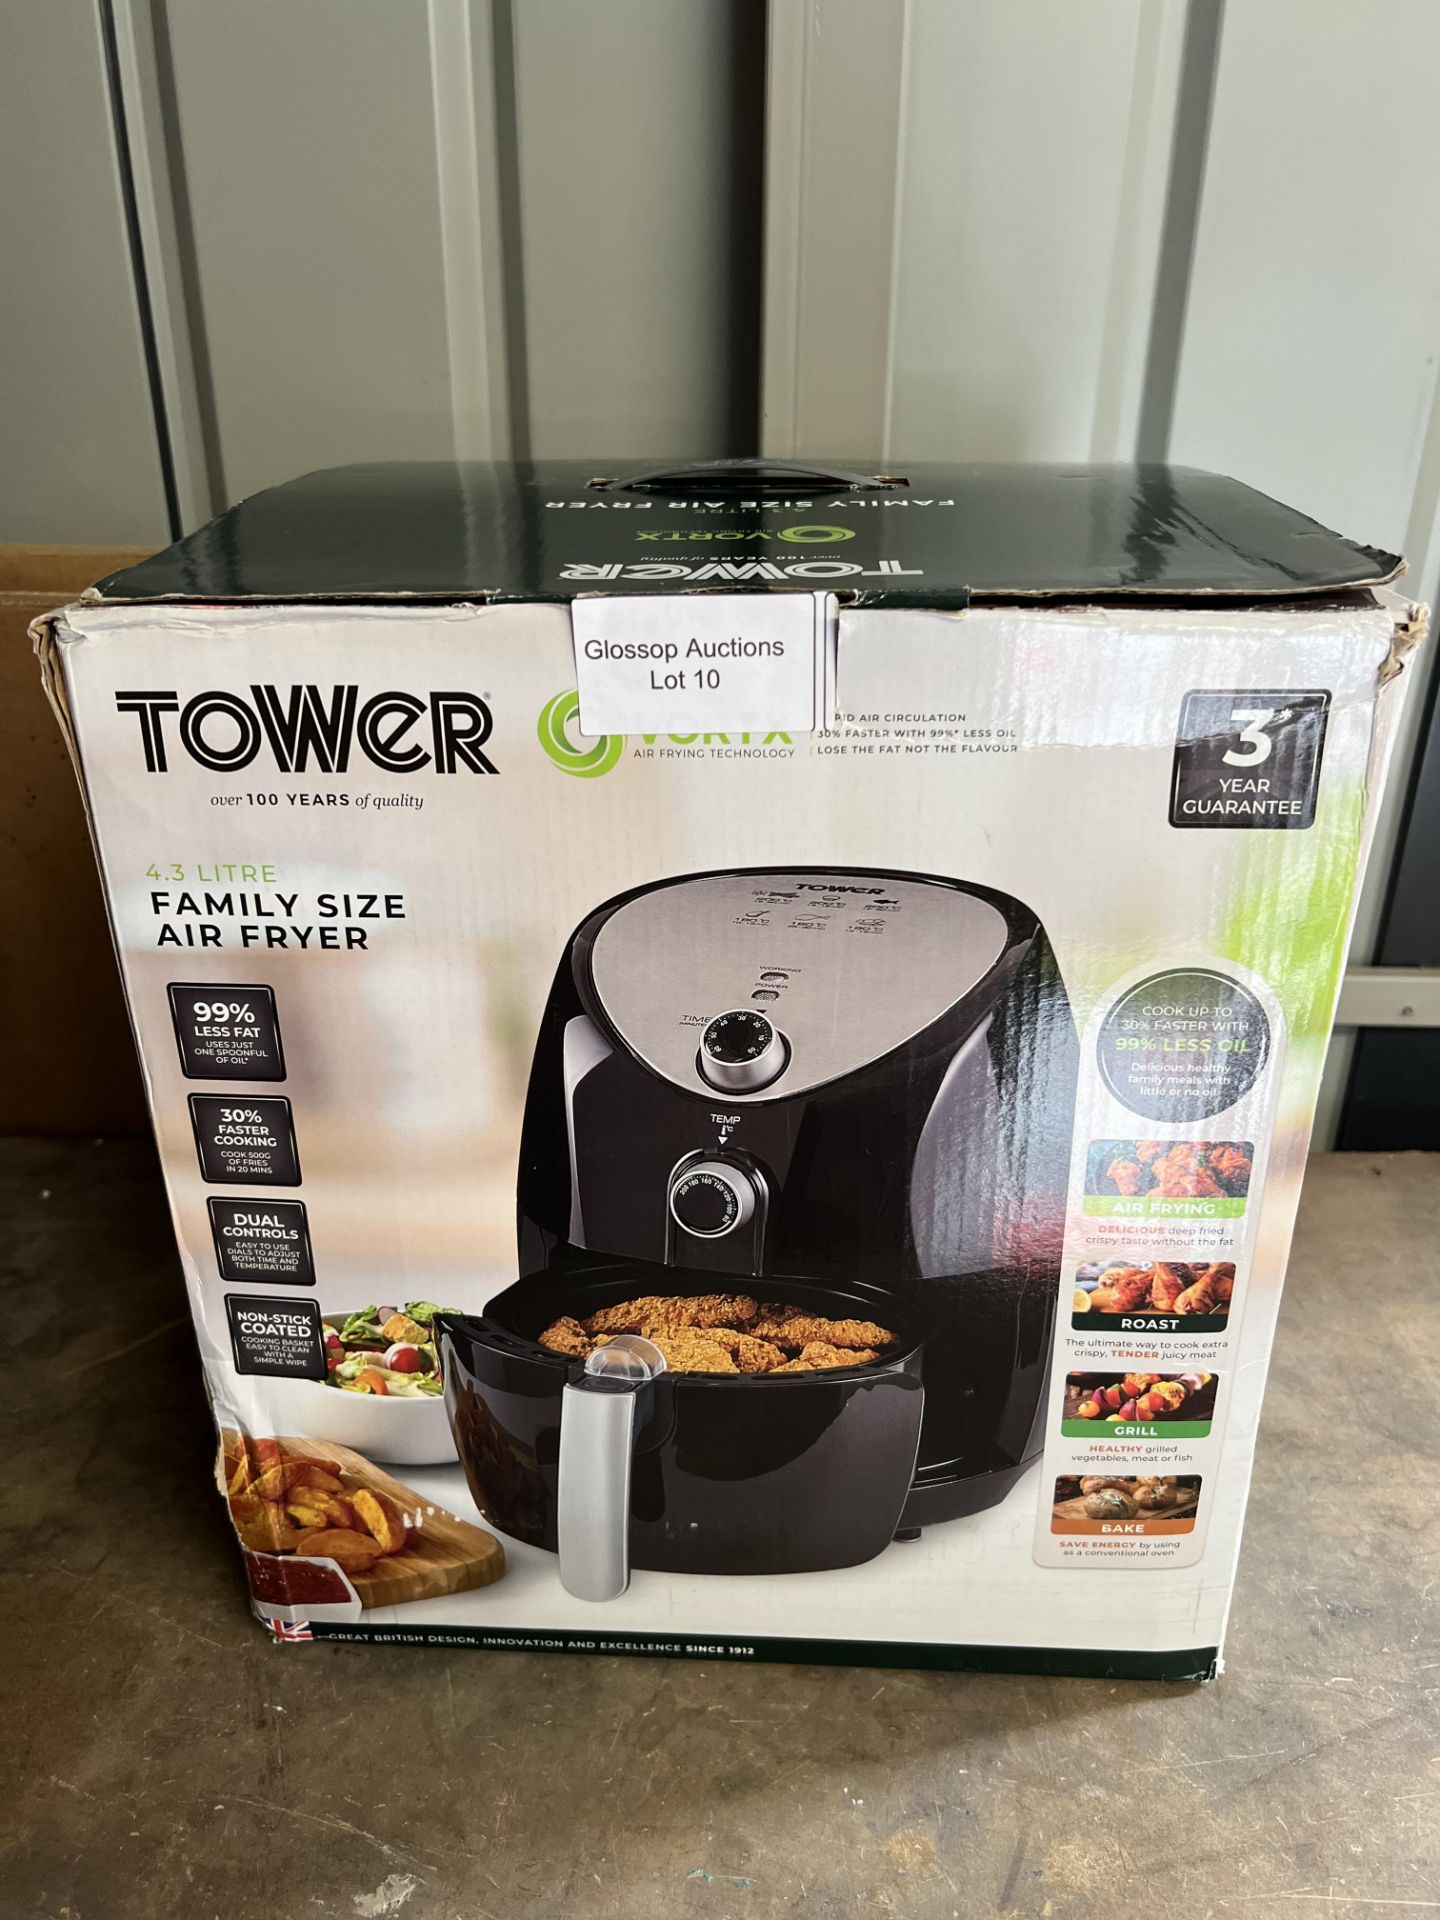 Tower T17021 Family Size Air Fryer with Rapid Air Circulation, 4.3 Litre. RRP £69.99 - GRADE U